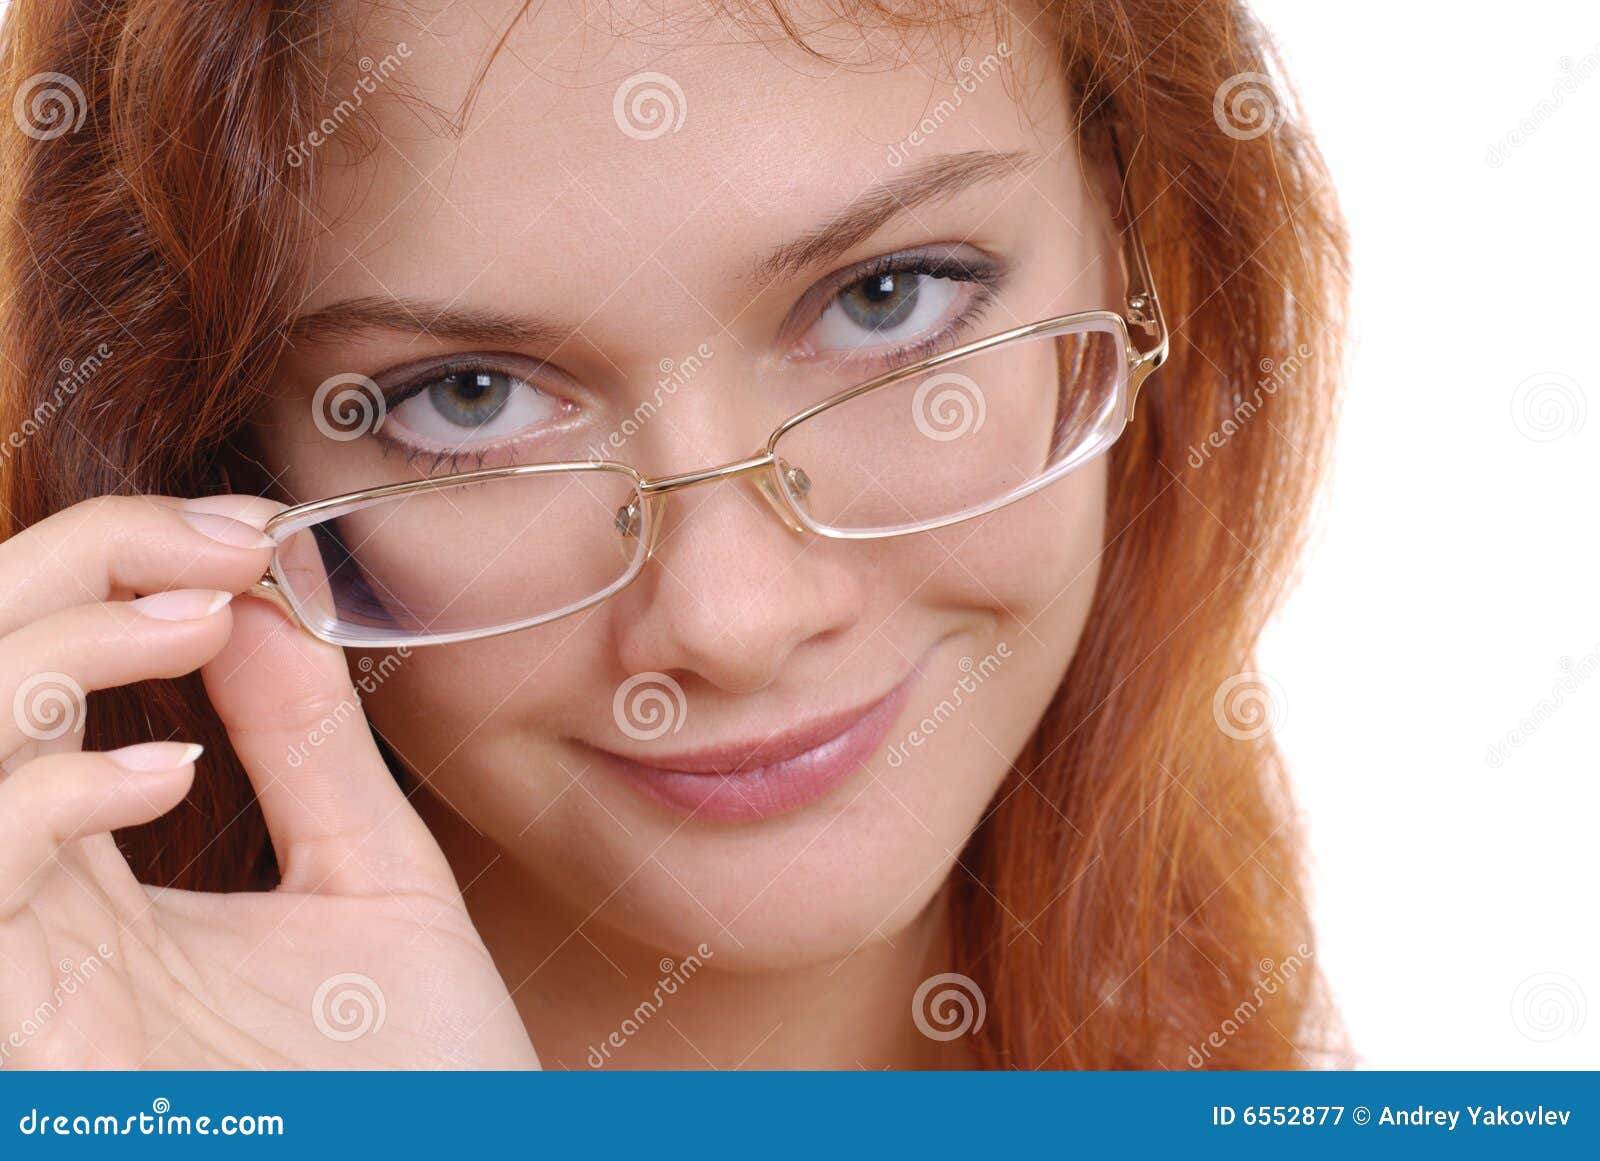 Beautiful Woman In Glasses Stock Image Image Of Female